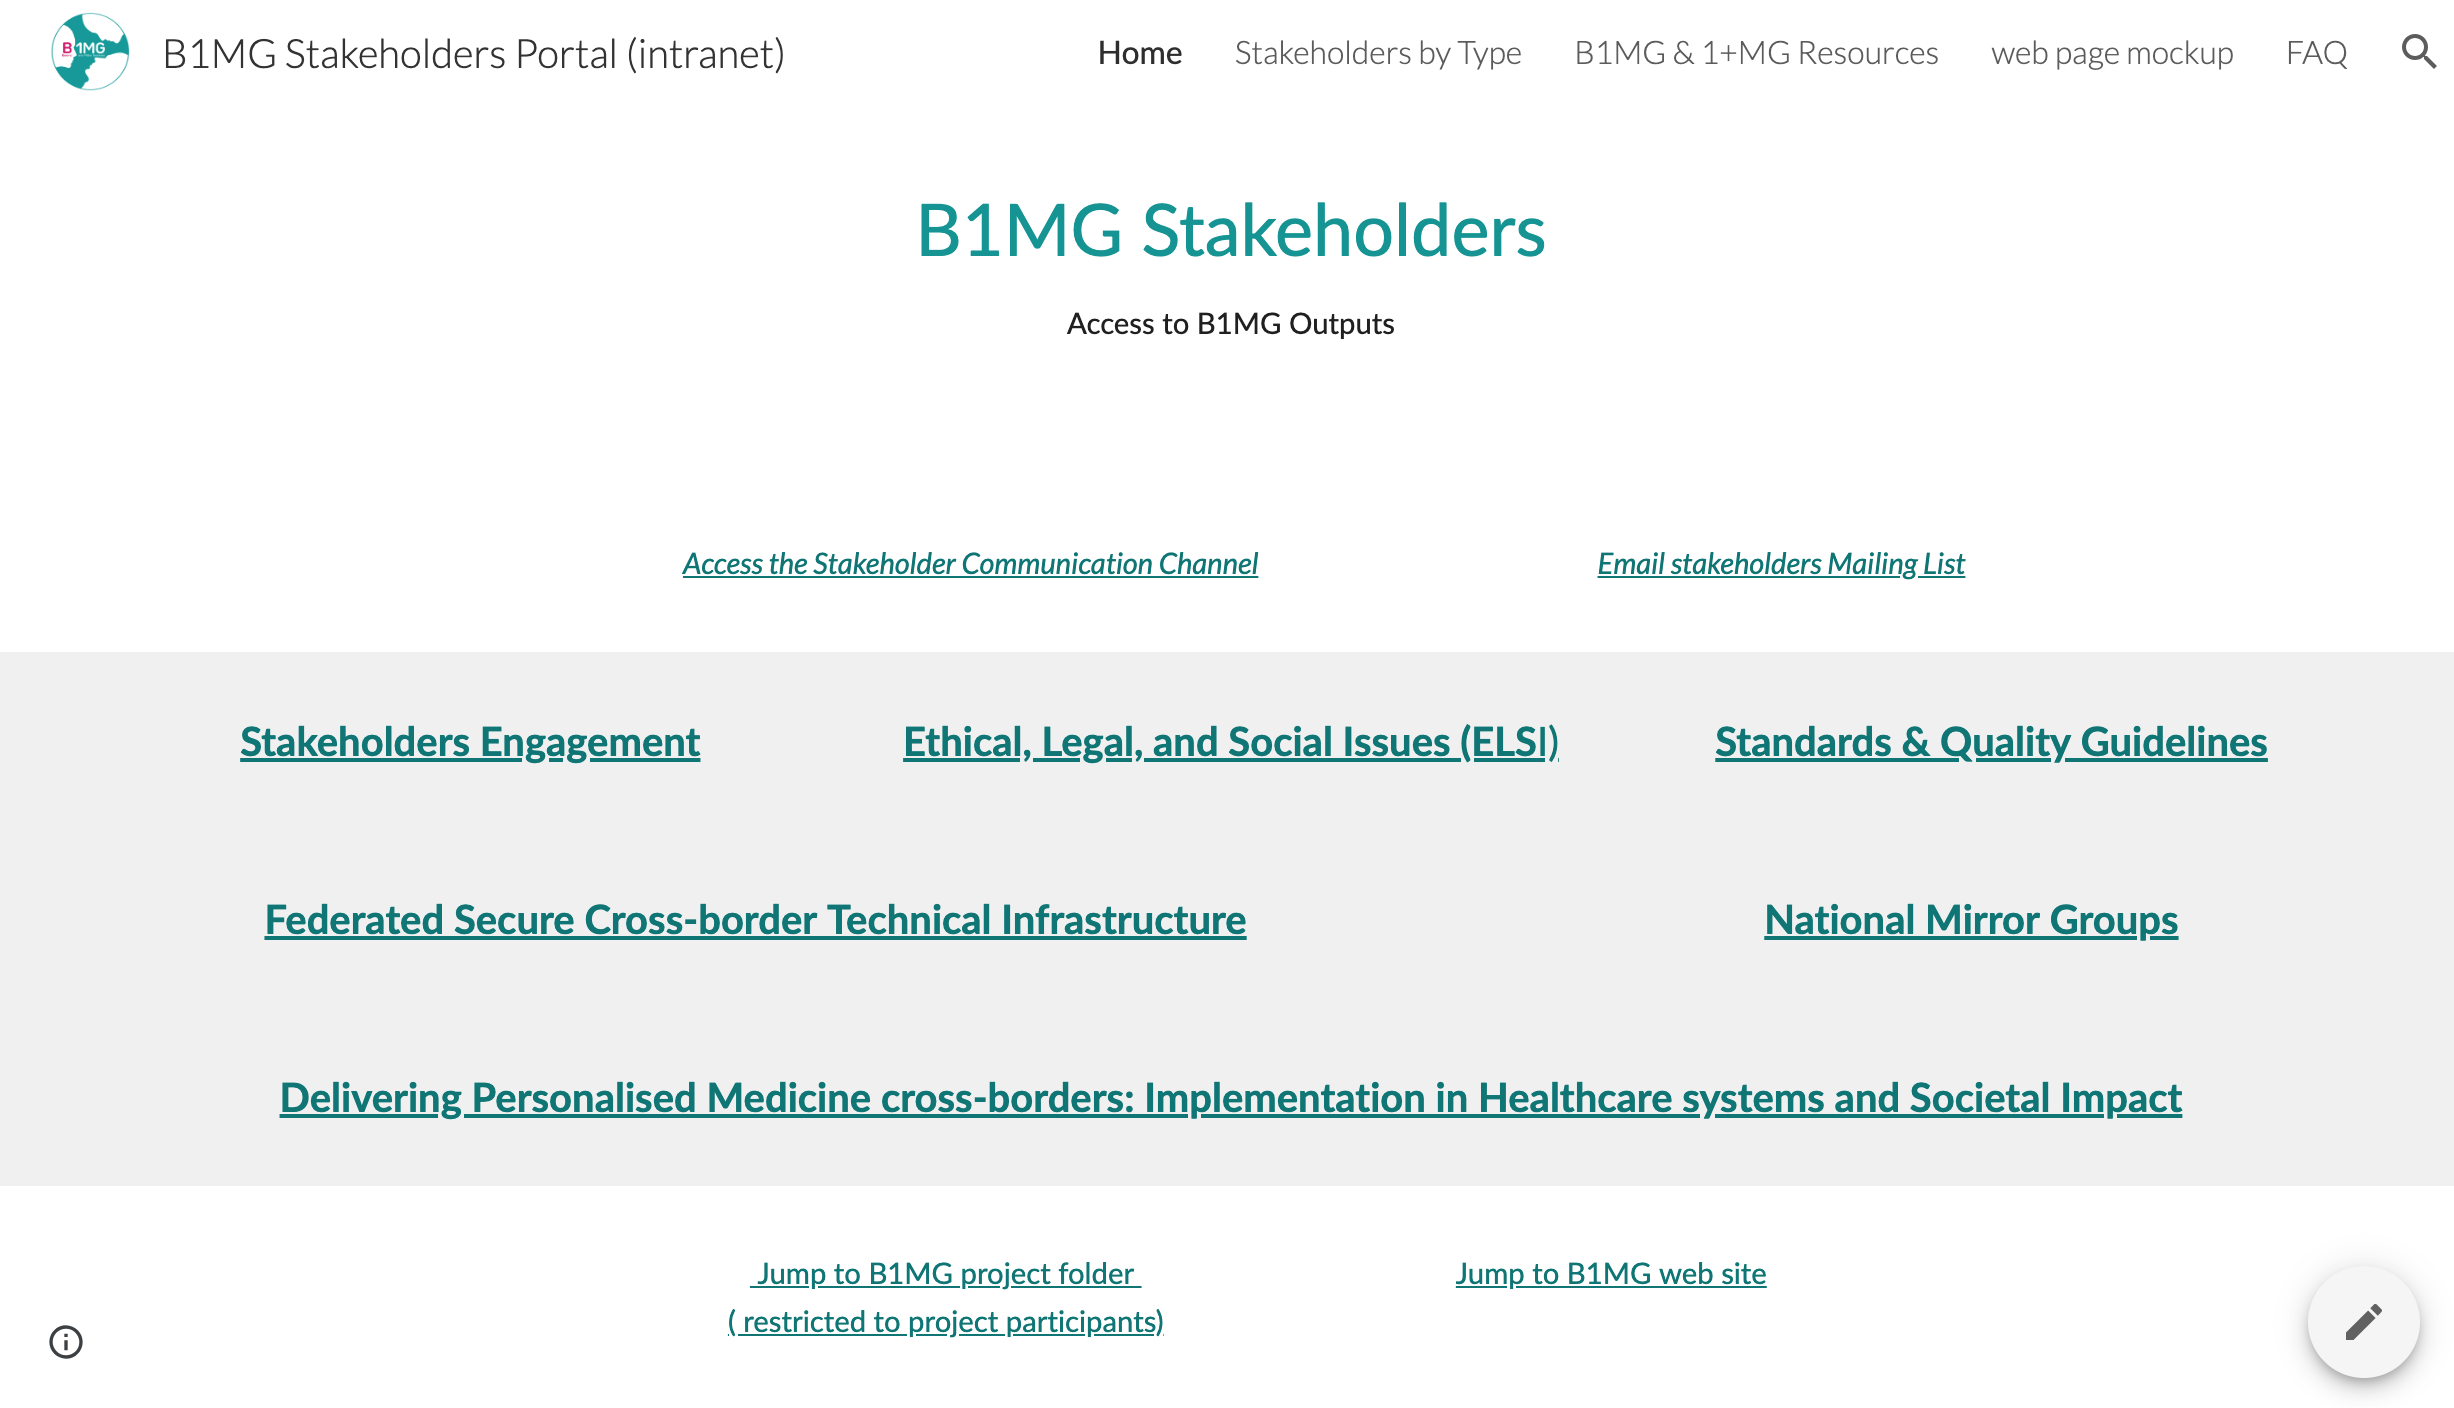 A screenshot of the stakeholder portal